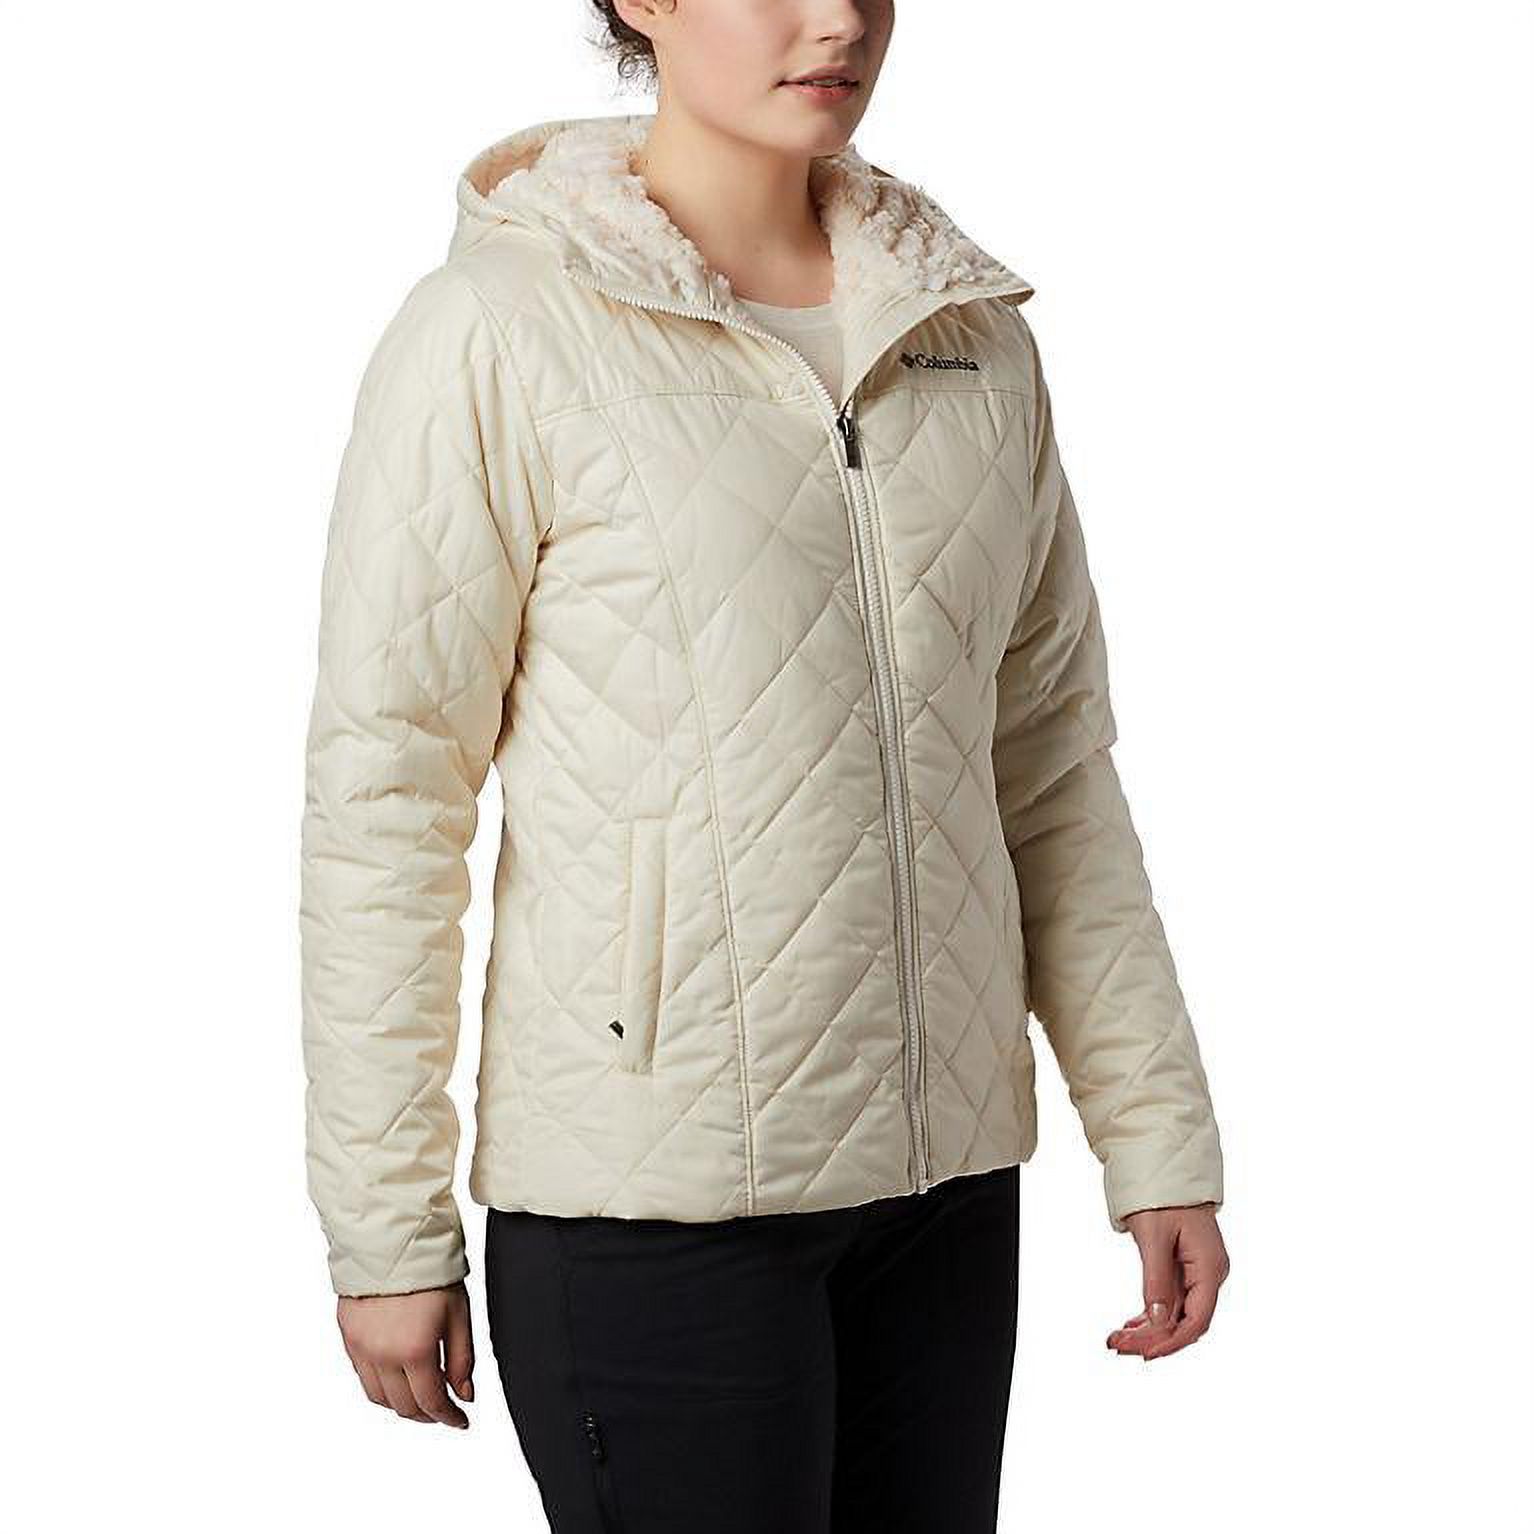 Columbia Women's Copper Crest Hooded Jacket 1761431192 - image 1 of 3